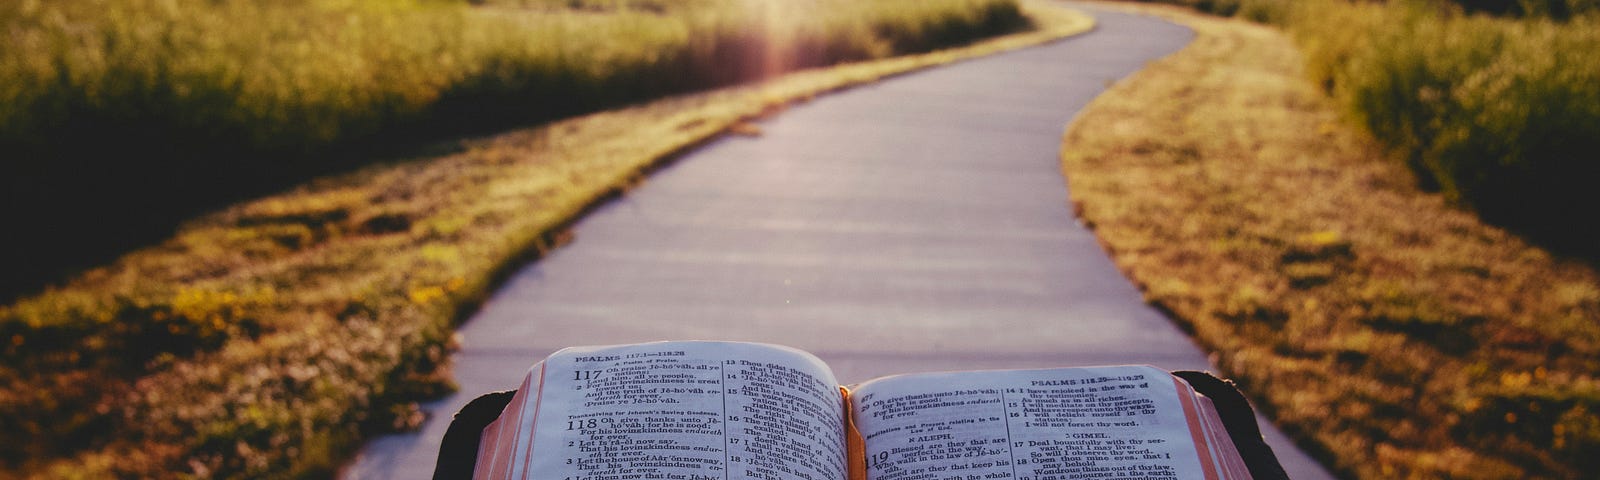 Book held up in front of a path on a country road